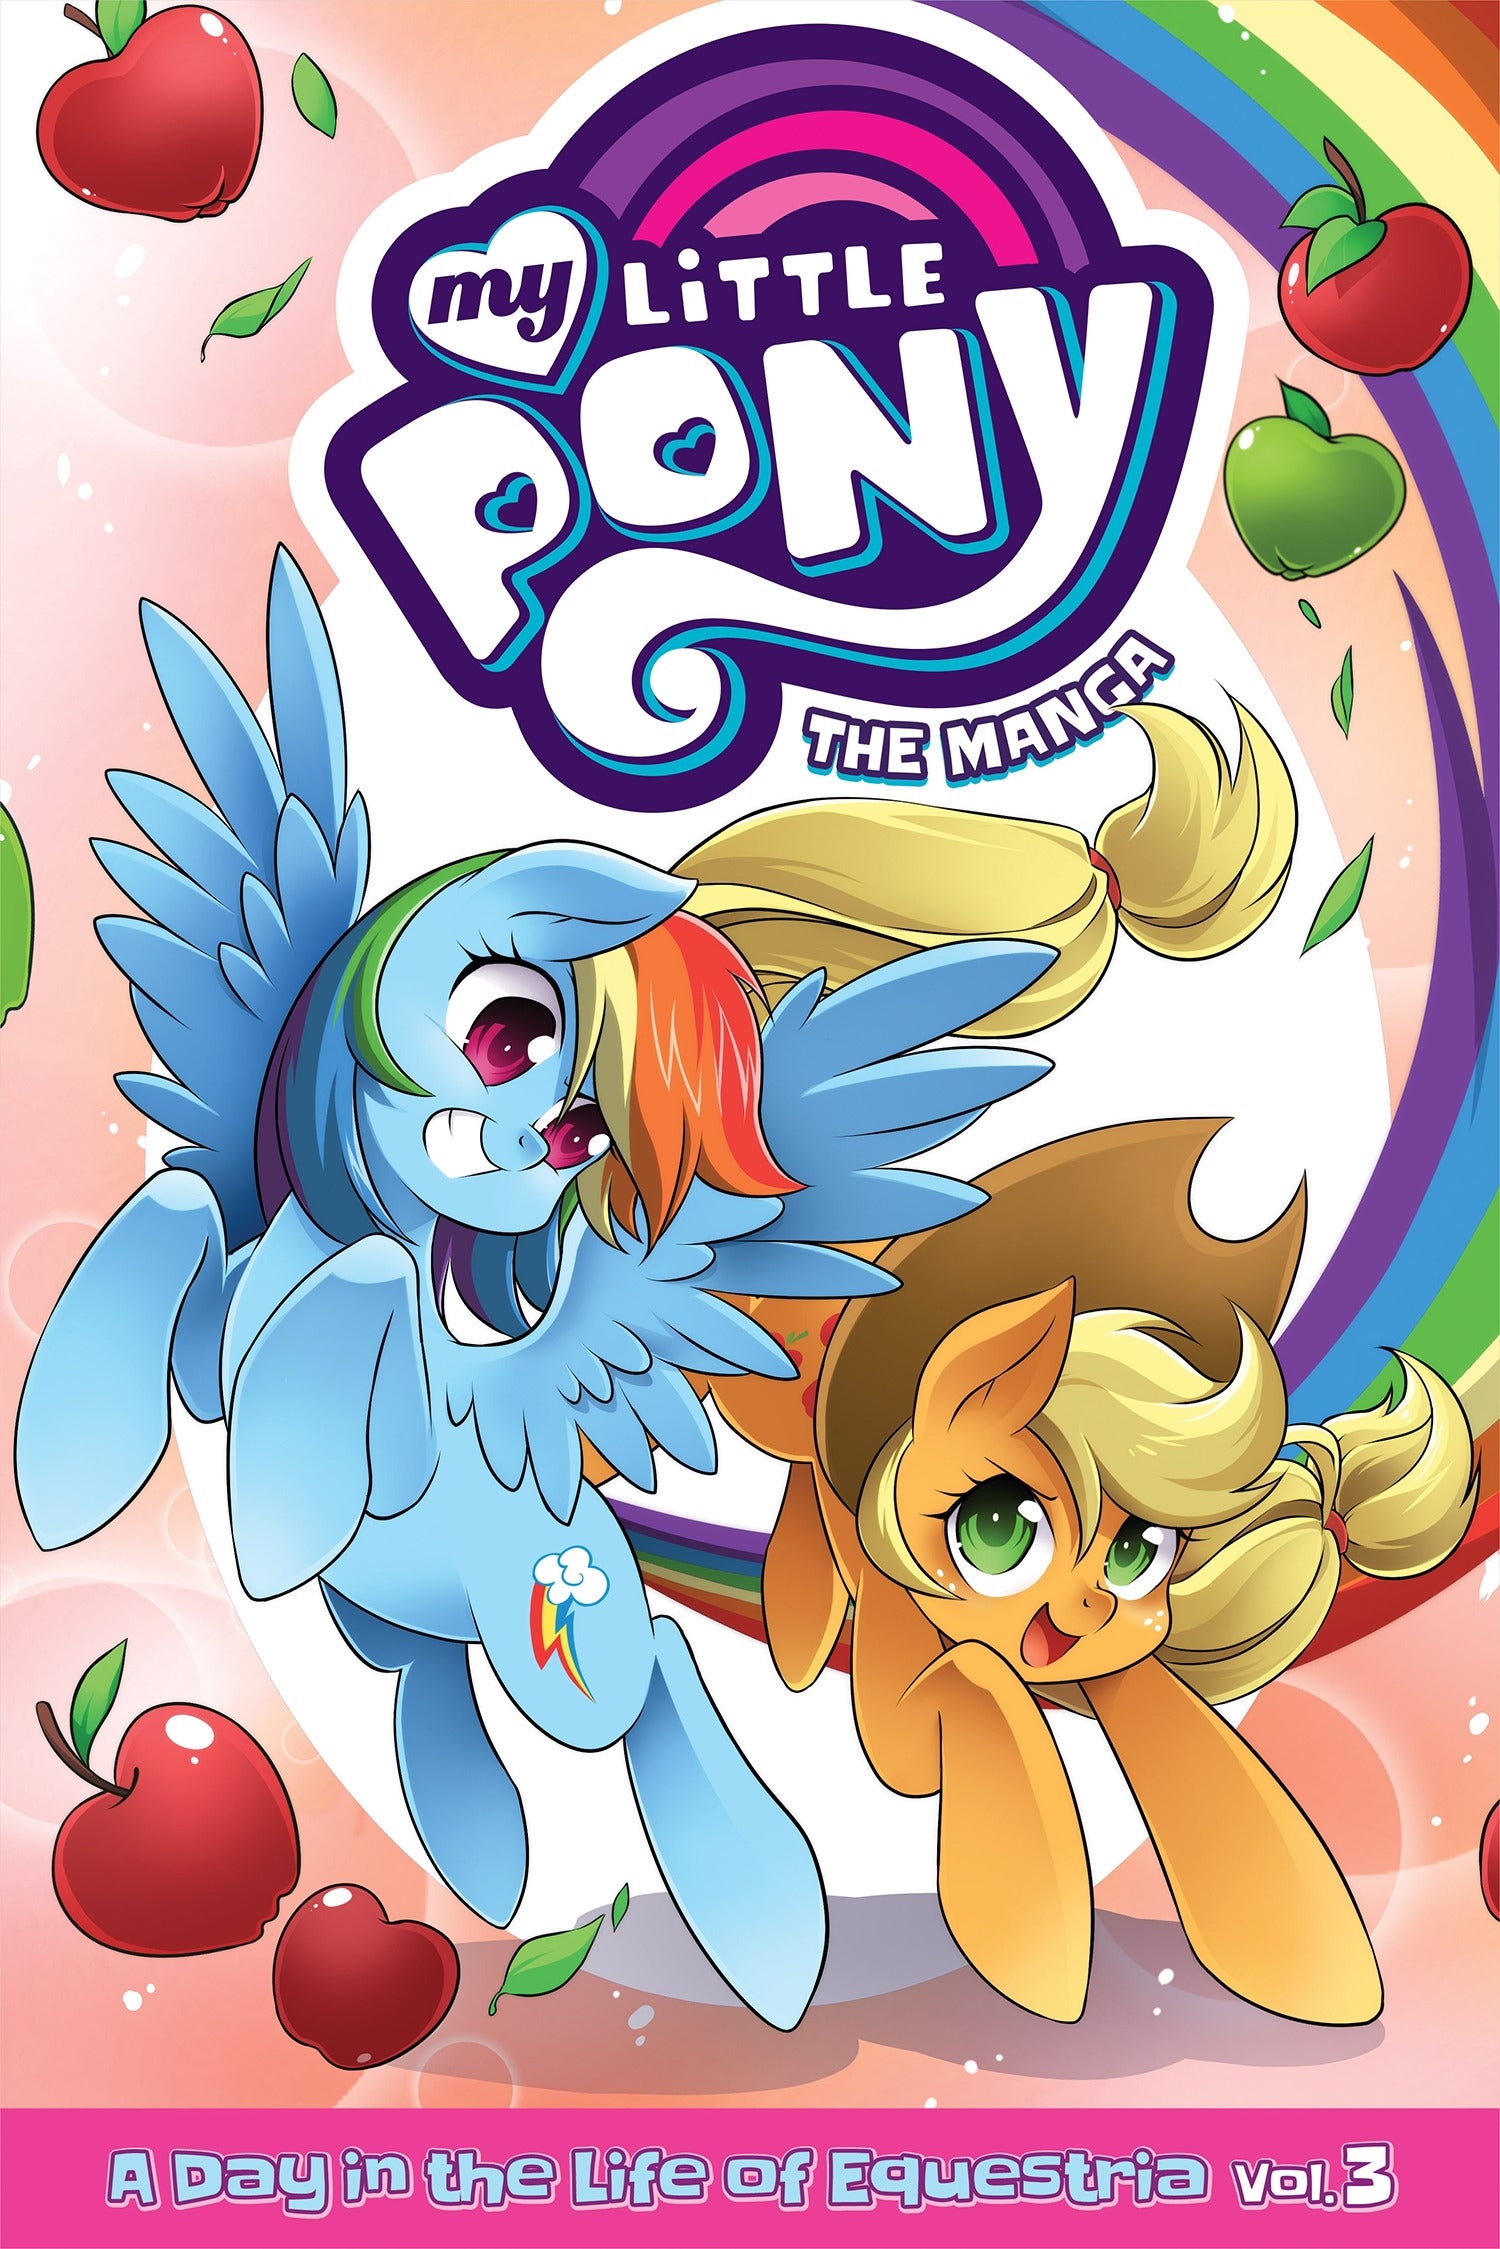 My Little Pony : The Manga - A Day in the Life of Equestria Vol. 3 - Manga Warehouse